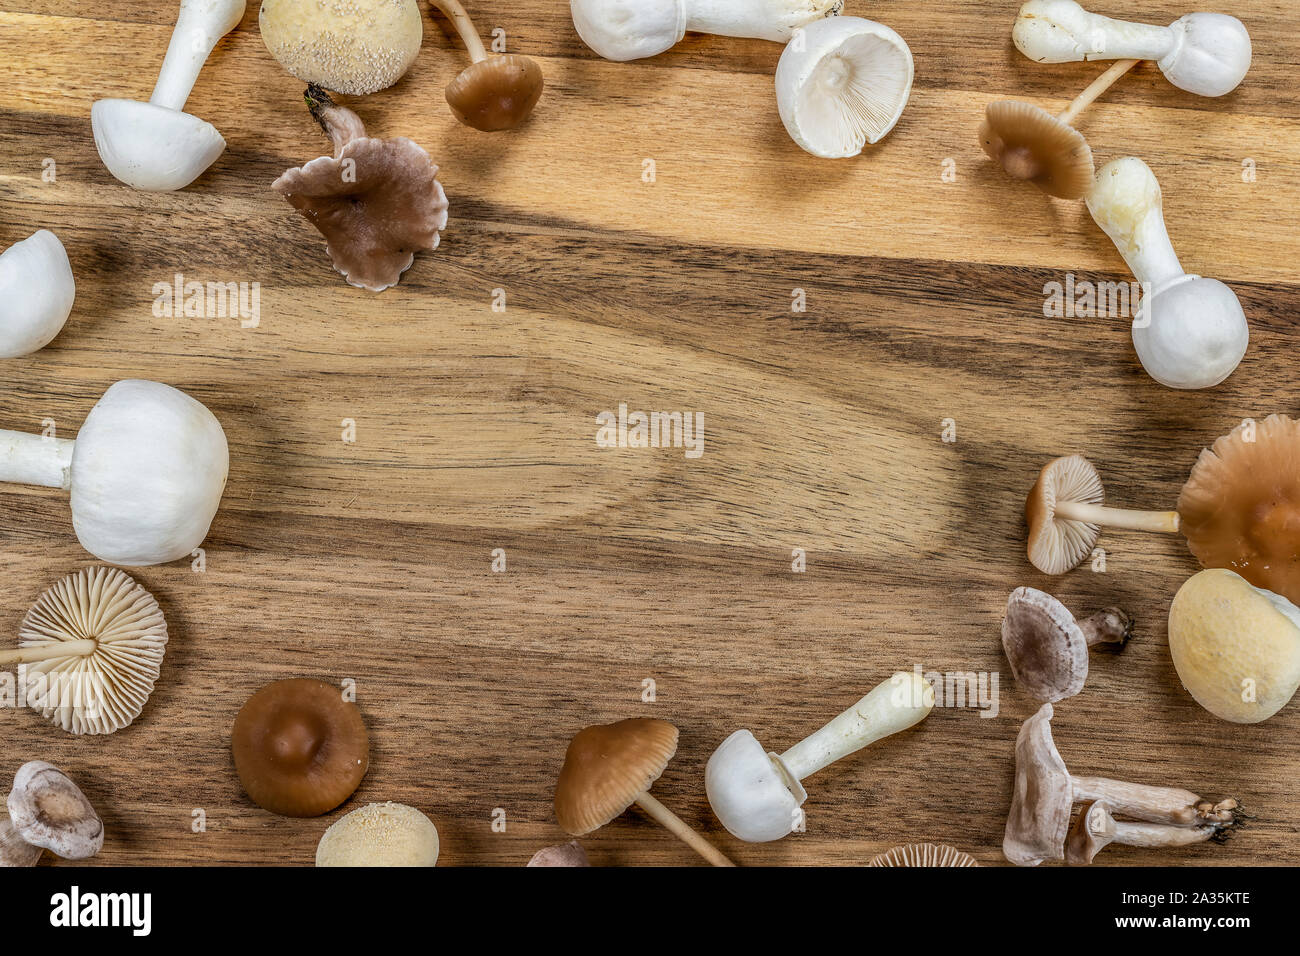 Mushroom autumn frame. Collection of white and brown tiny mushrooms on wooden background. Stock Photo